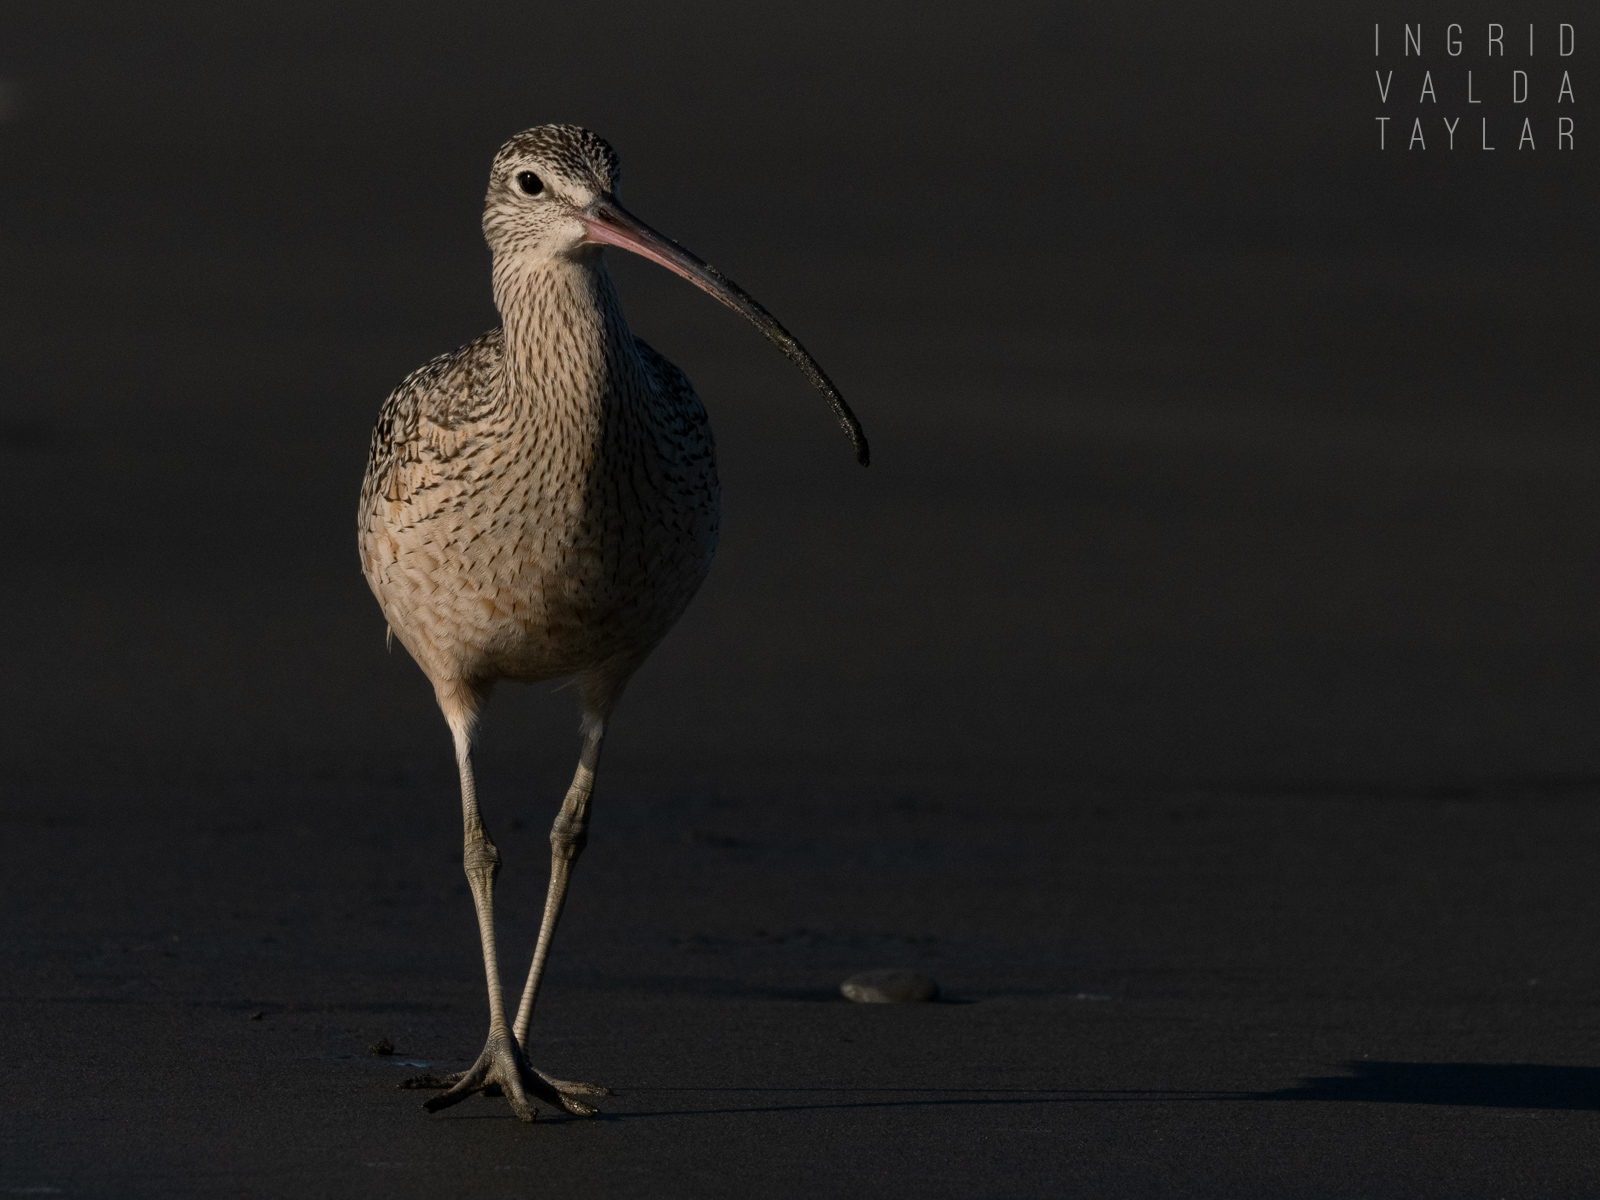 Long-Billed Curlew in Magic Hour Light